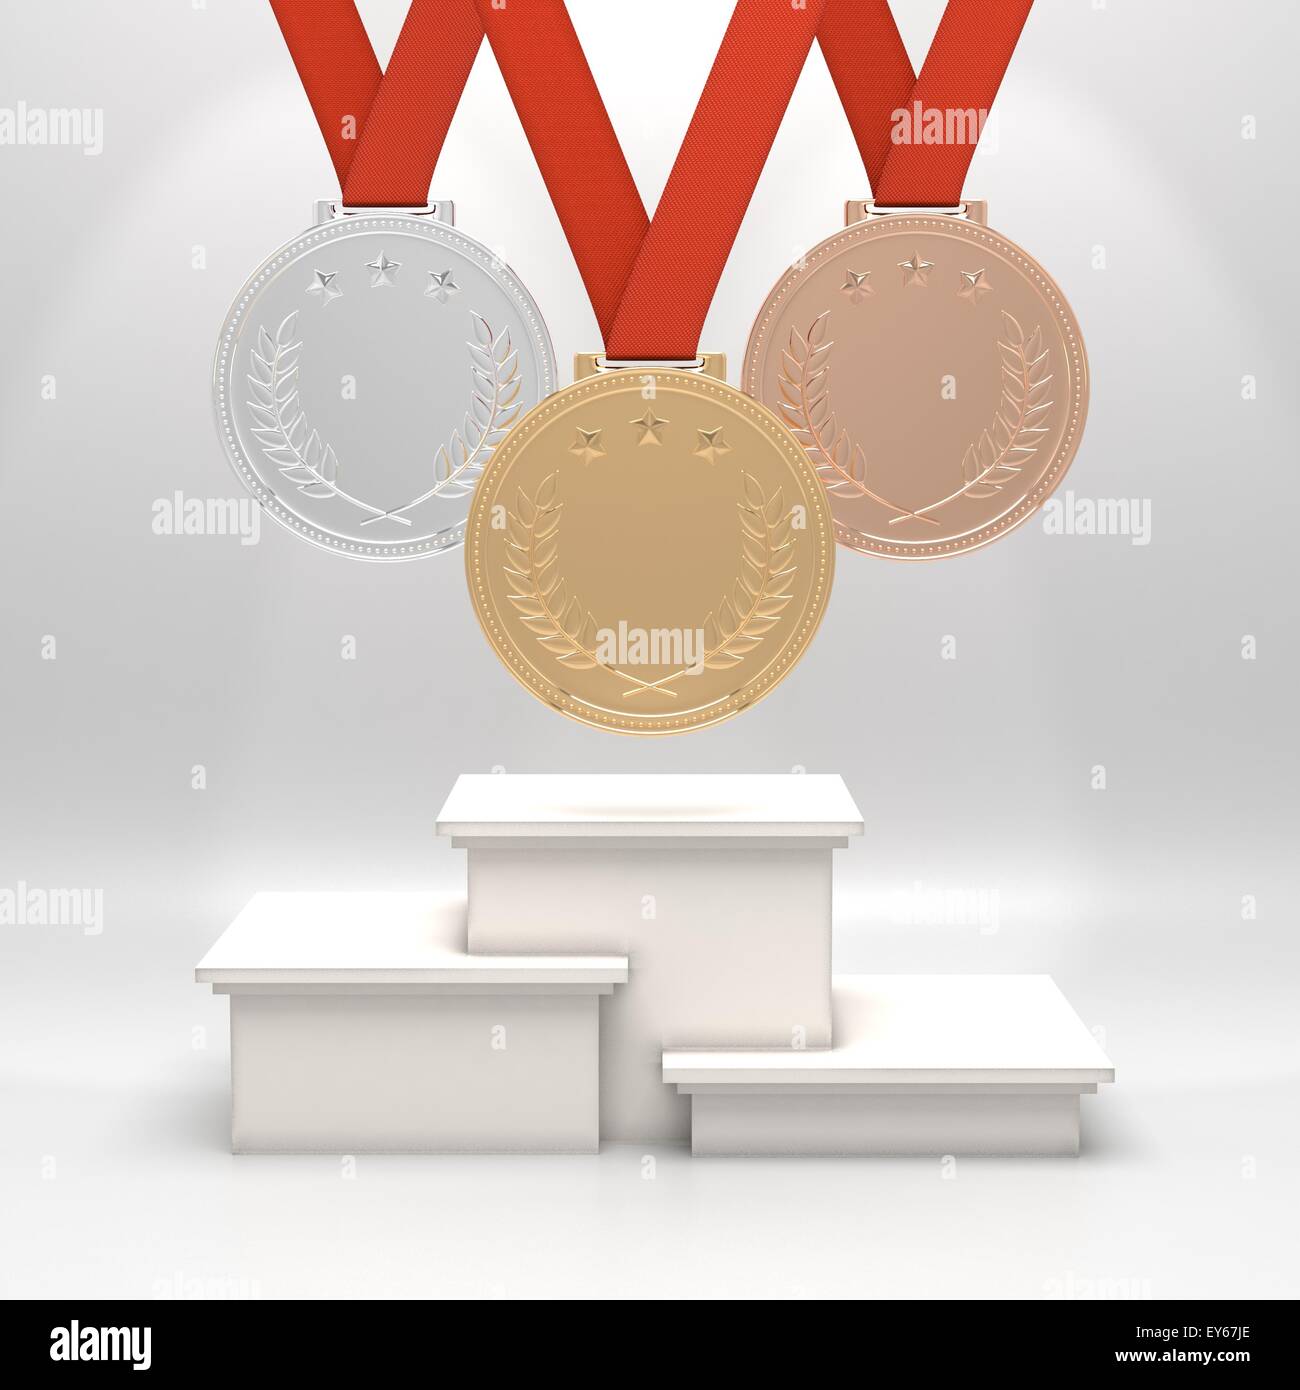 Medals and podium Stock Photo